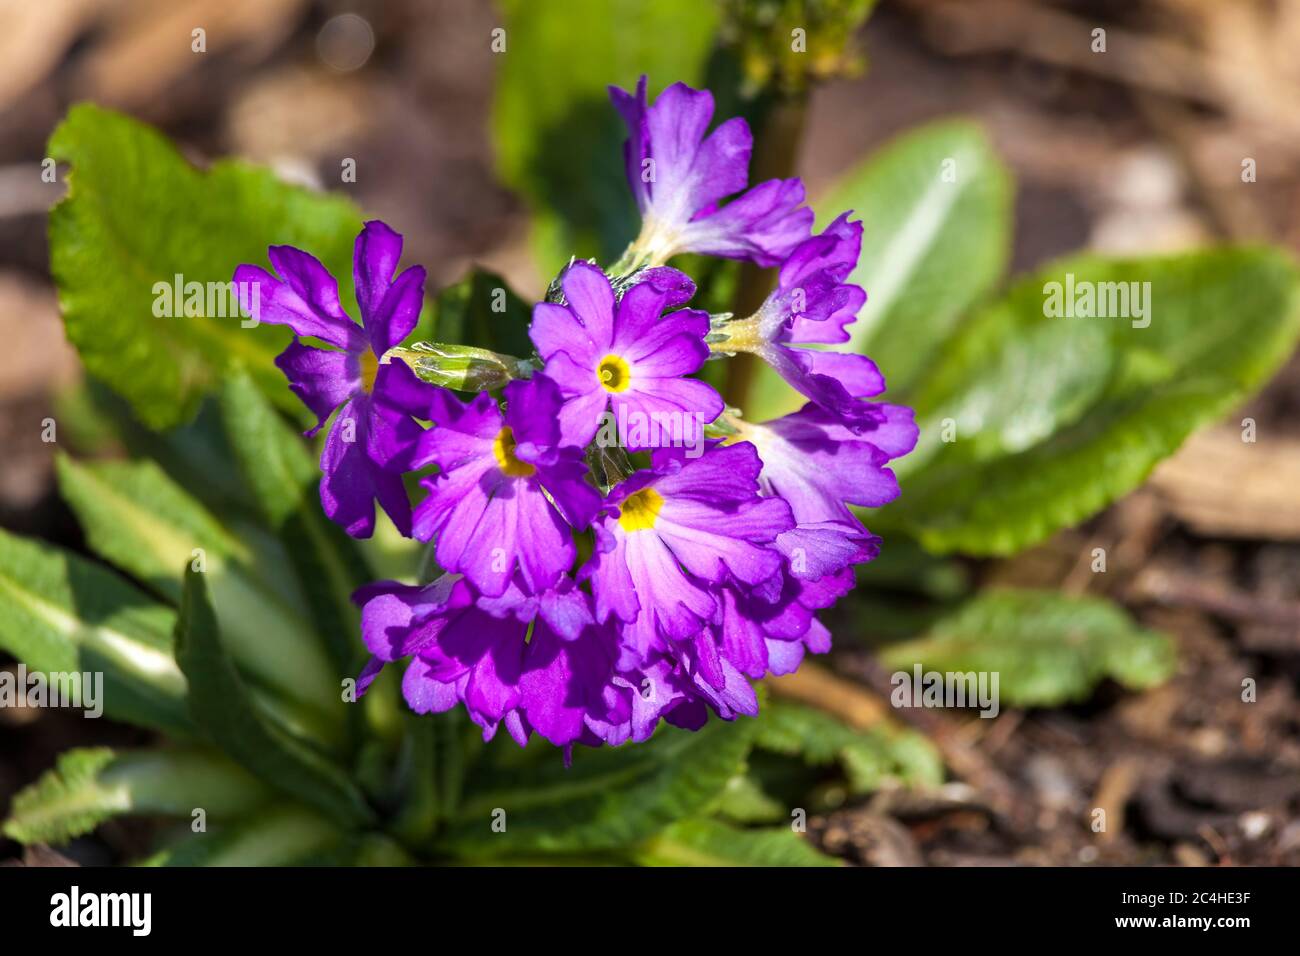 Primula denticulata a spring purple perennial flower plant commonly known as drumstick primula Stock Photo